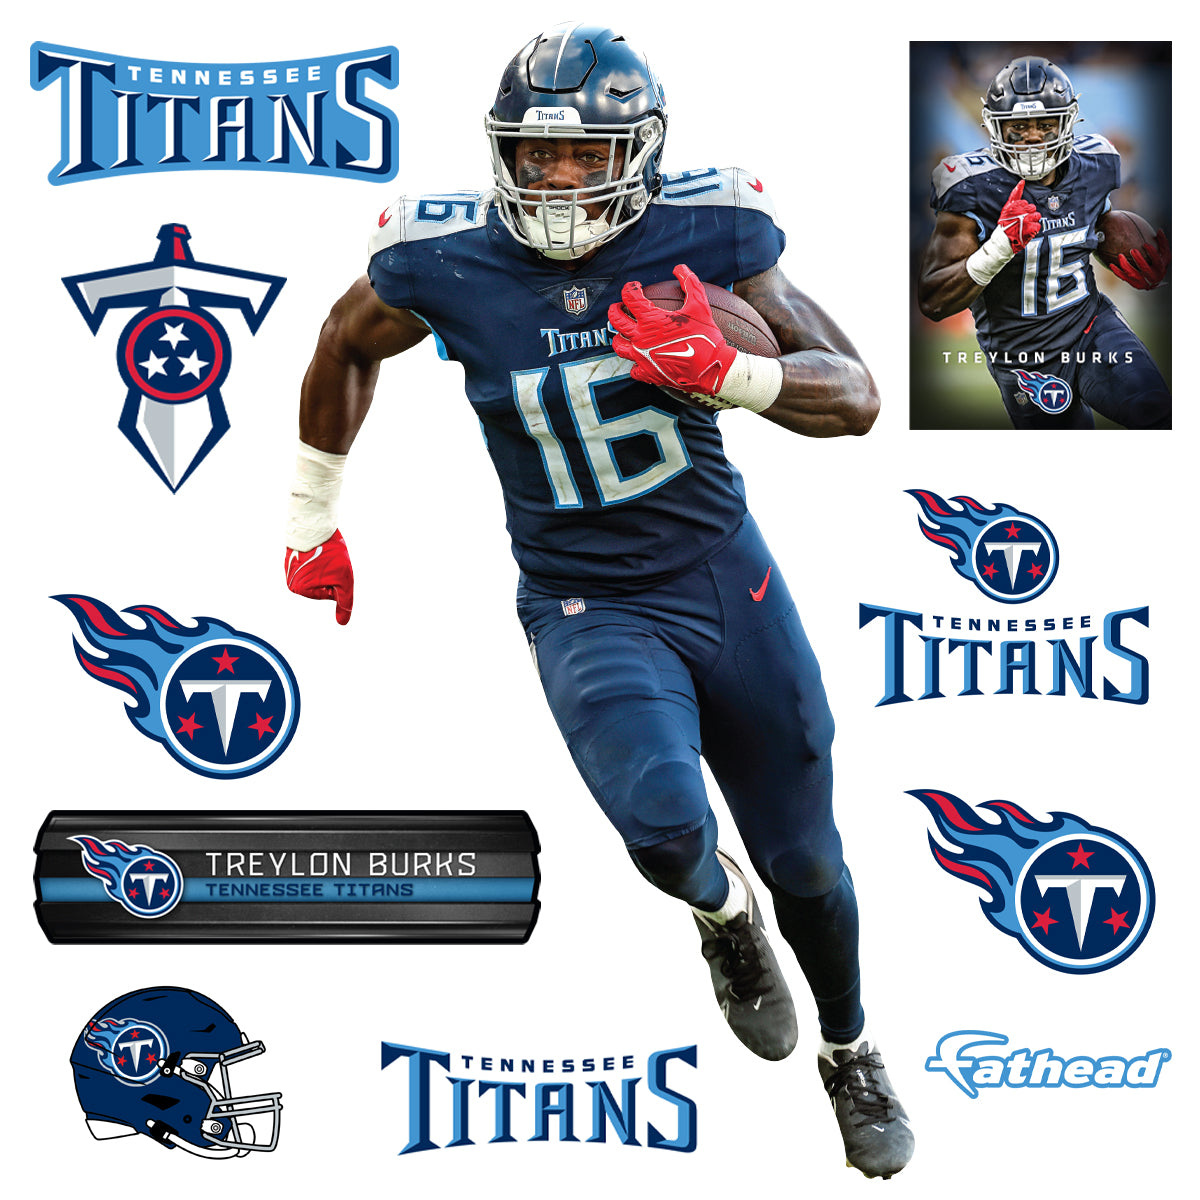 The Official Site of the Tennessee Titans